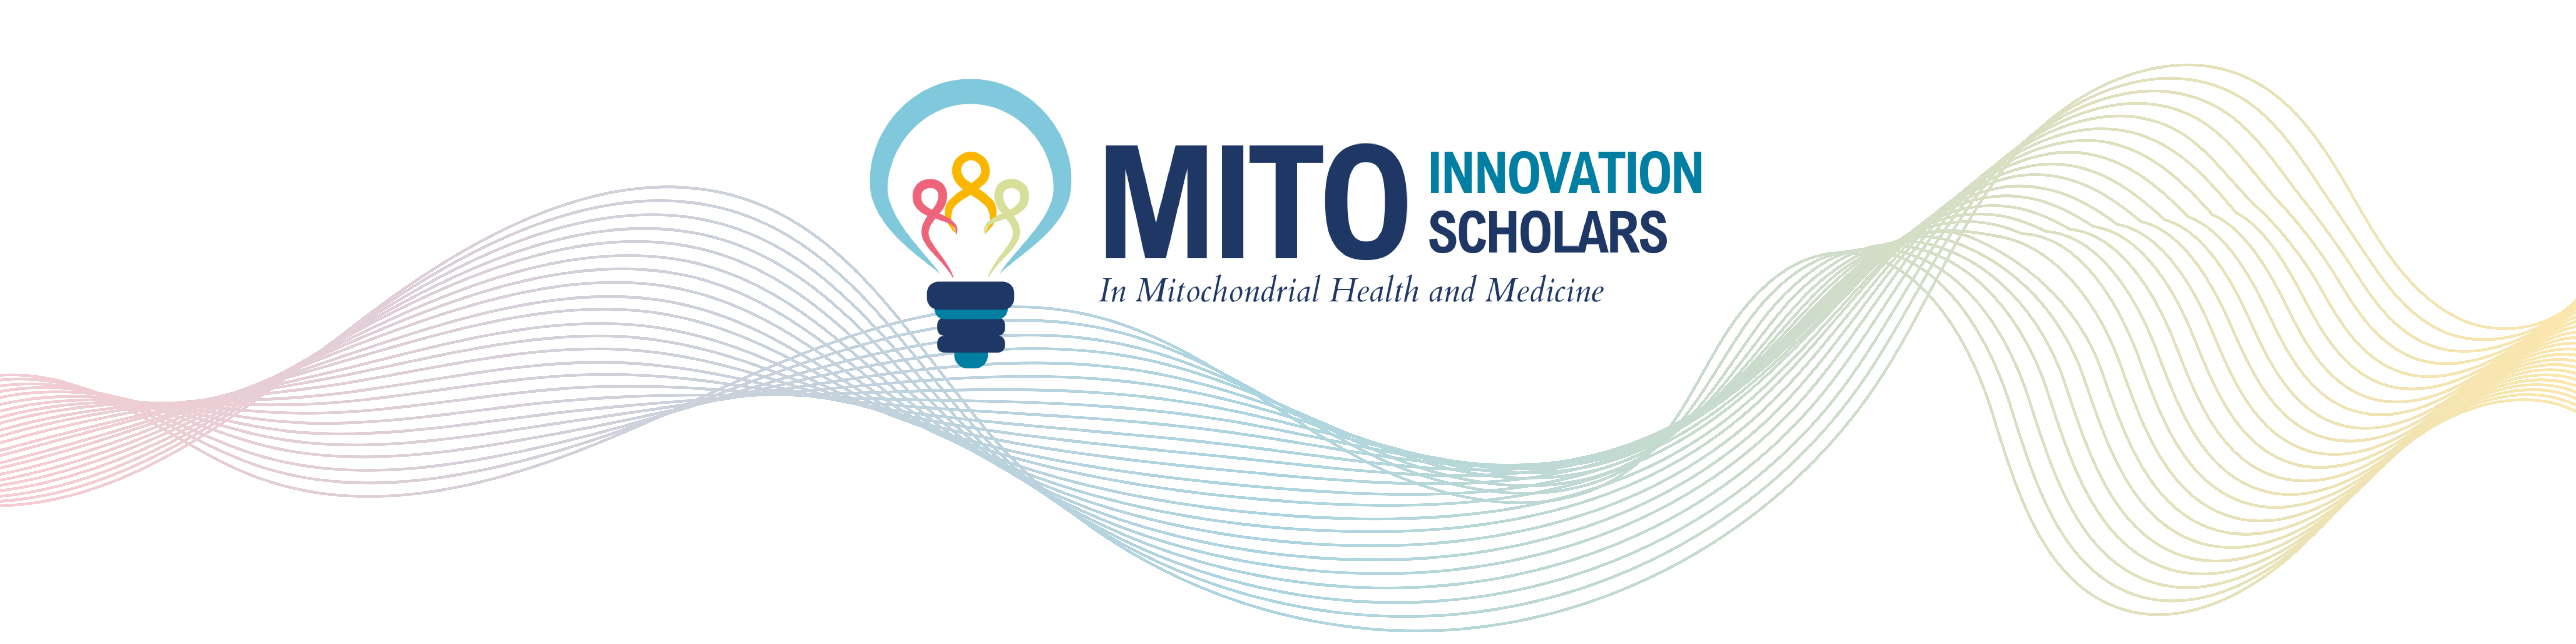 MITO Innovation Scholars In Mitochondrial Health and Medicine